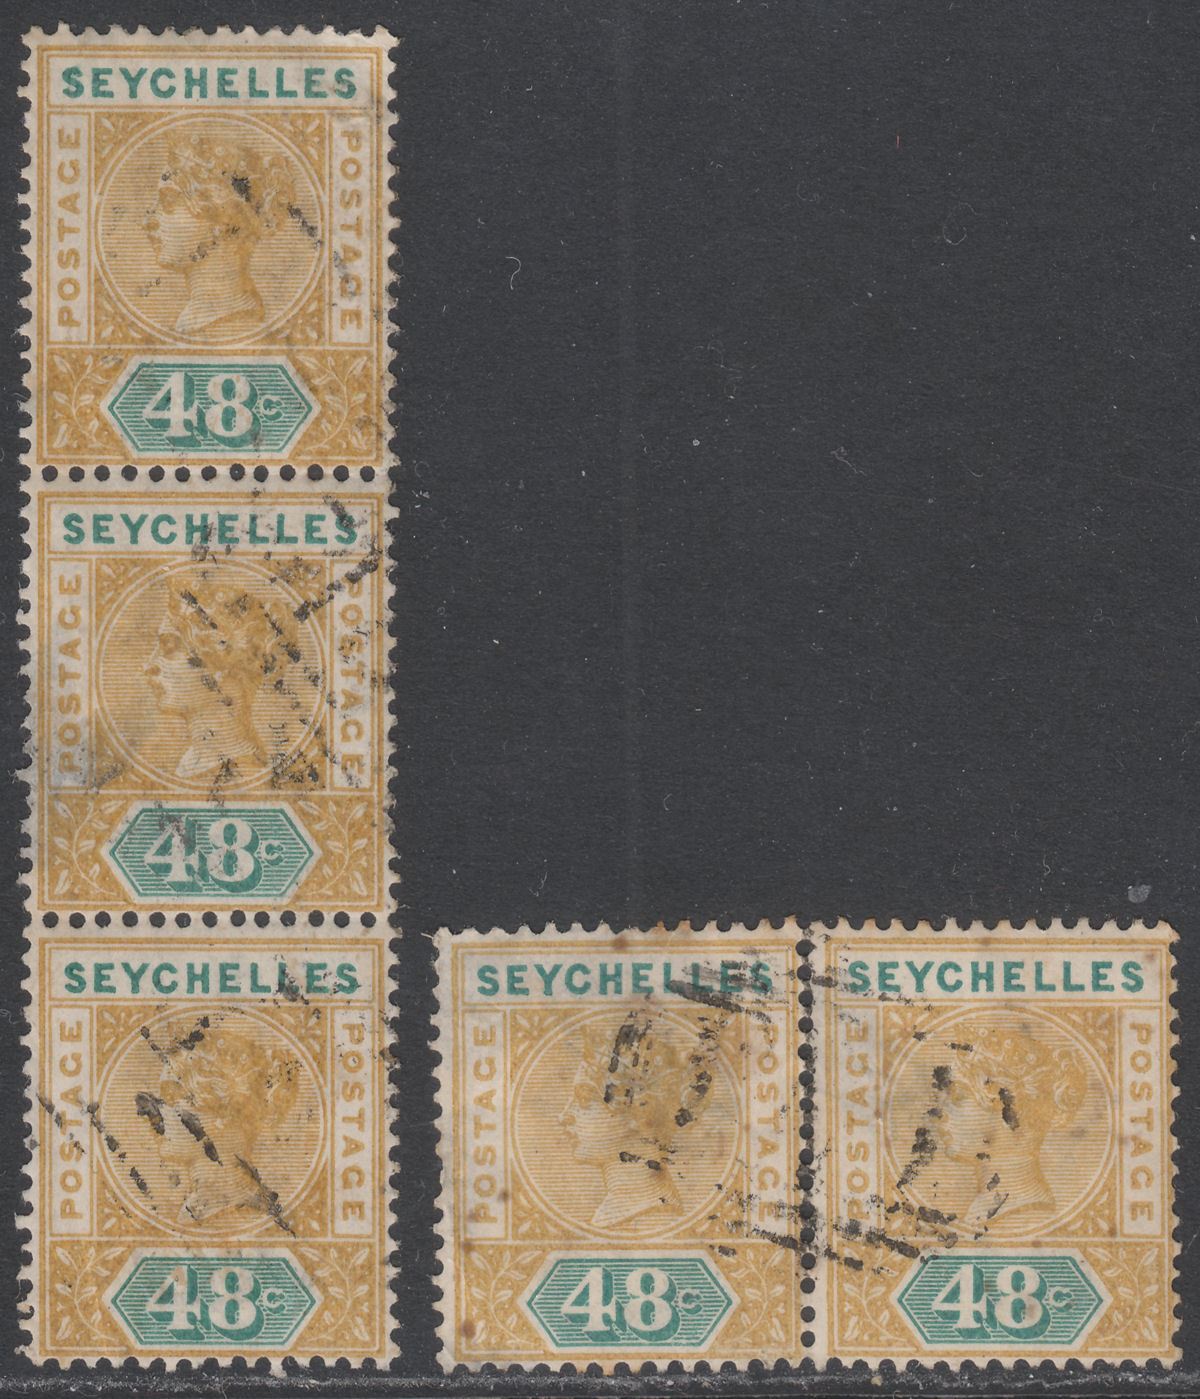 Seychelles 1890 Queen Victoria 48c Ochre and Green Selection Used SG7 - FAULTY